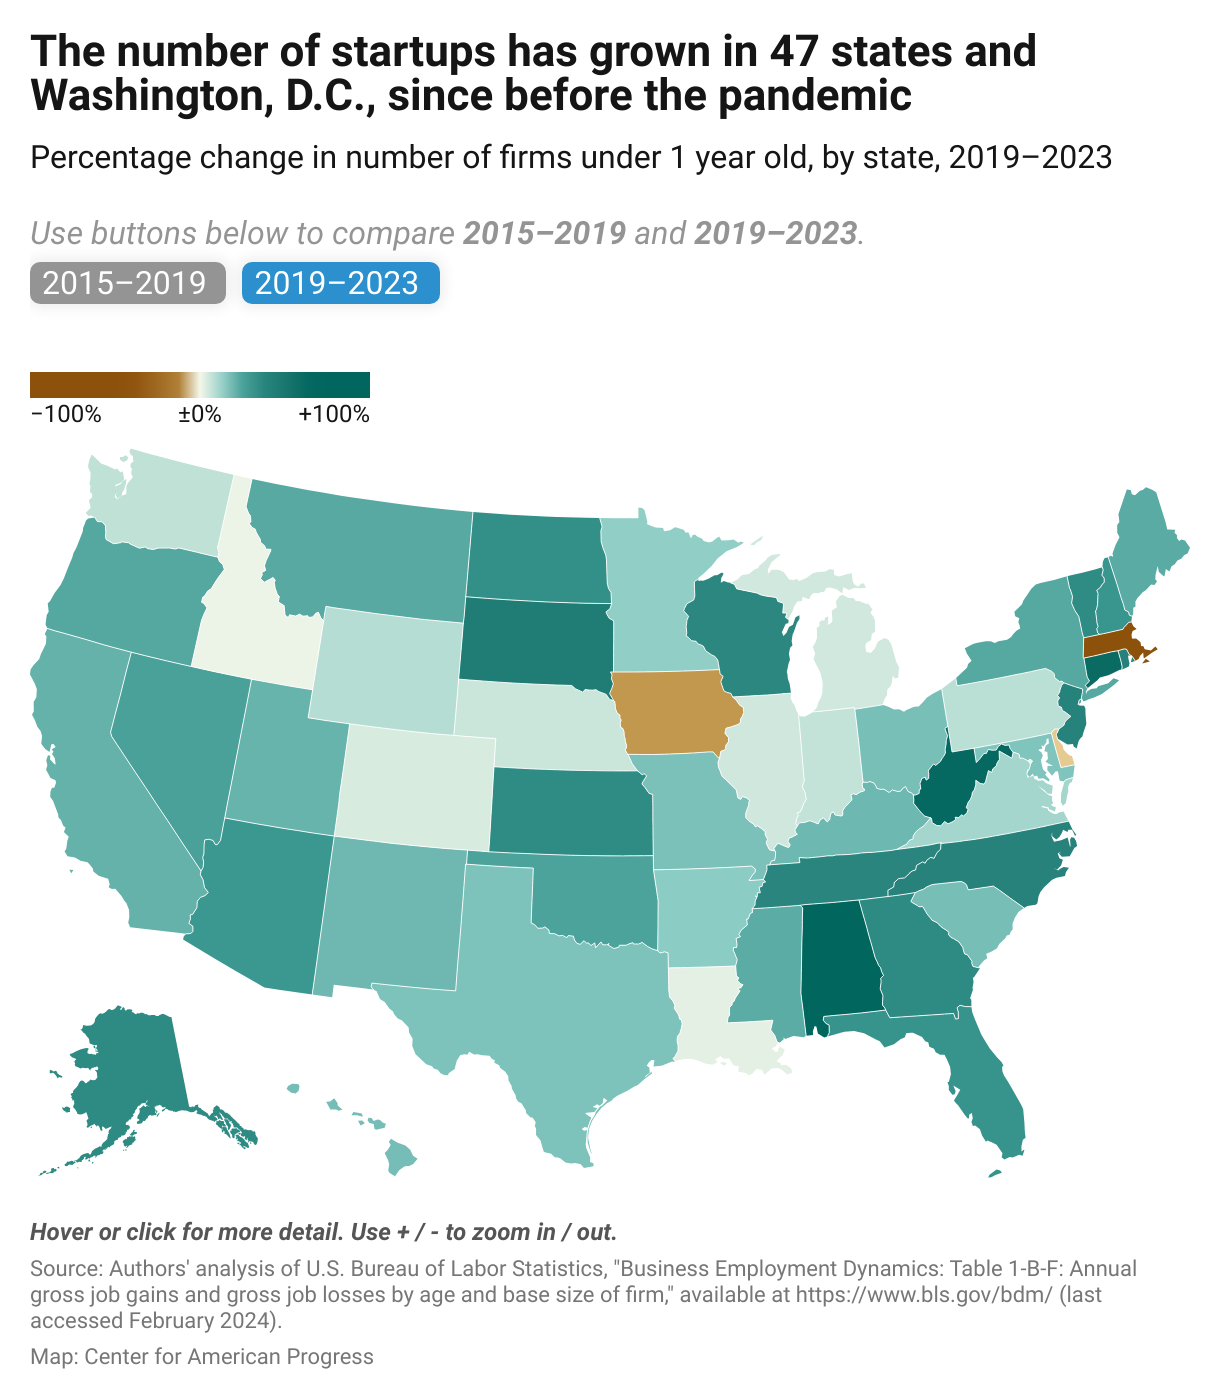 A map showing growth in the number of start-ups between 2019 and 2023 compared with those between 2015 and 2019. Between 2019 and 2023, all but three states (Massachusetts, Iowa, and Delaware) saw growth in the number of startups. Between 2015 and 2019, only 34 states and Washington, D.C., saw growth in the number of startups.